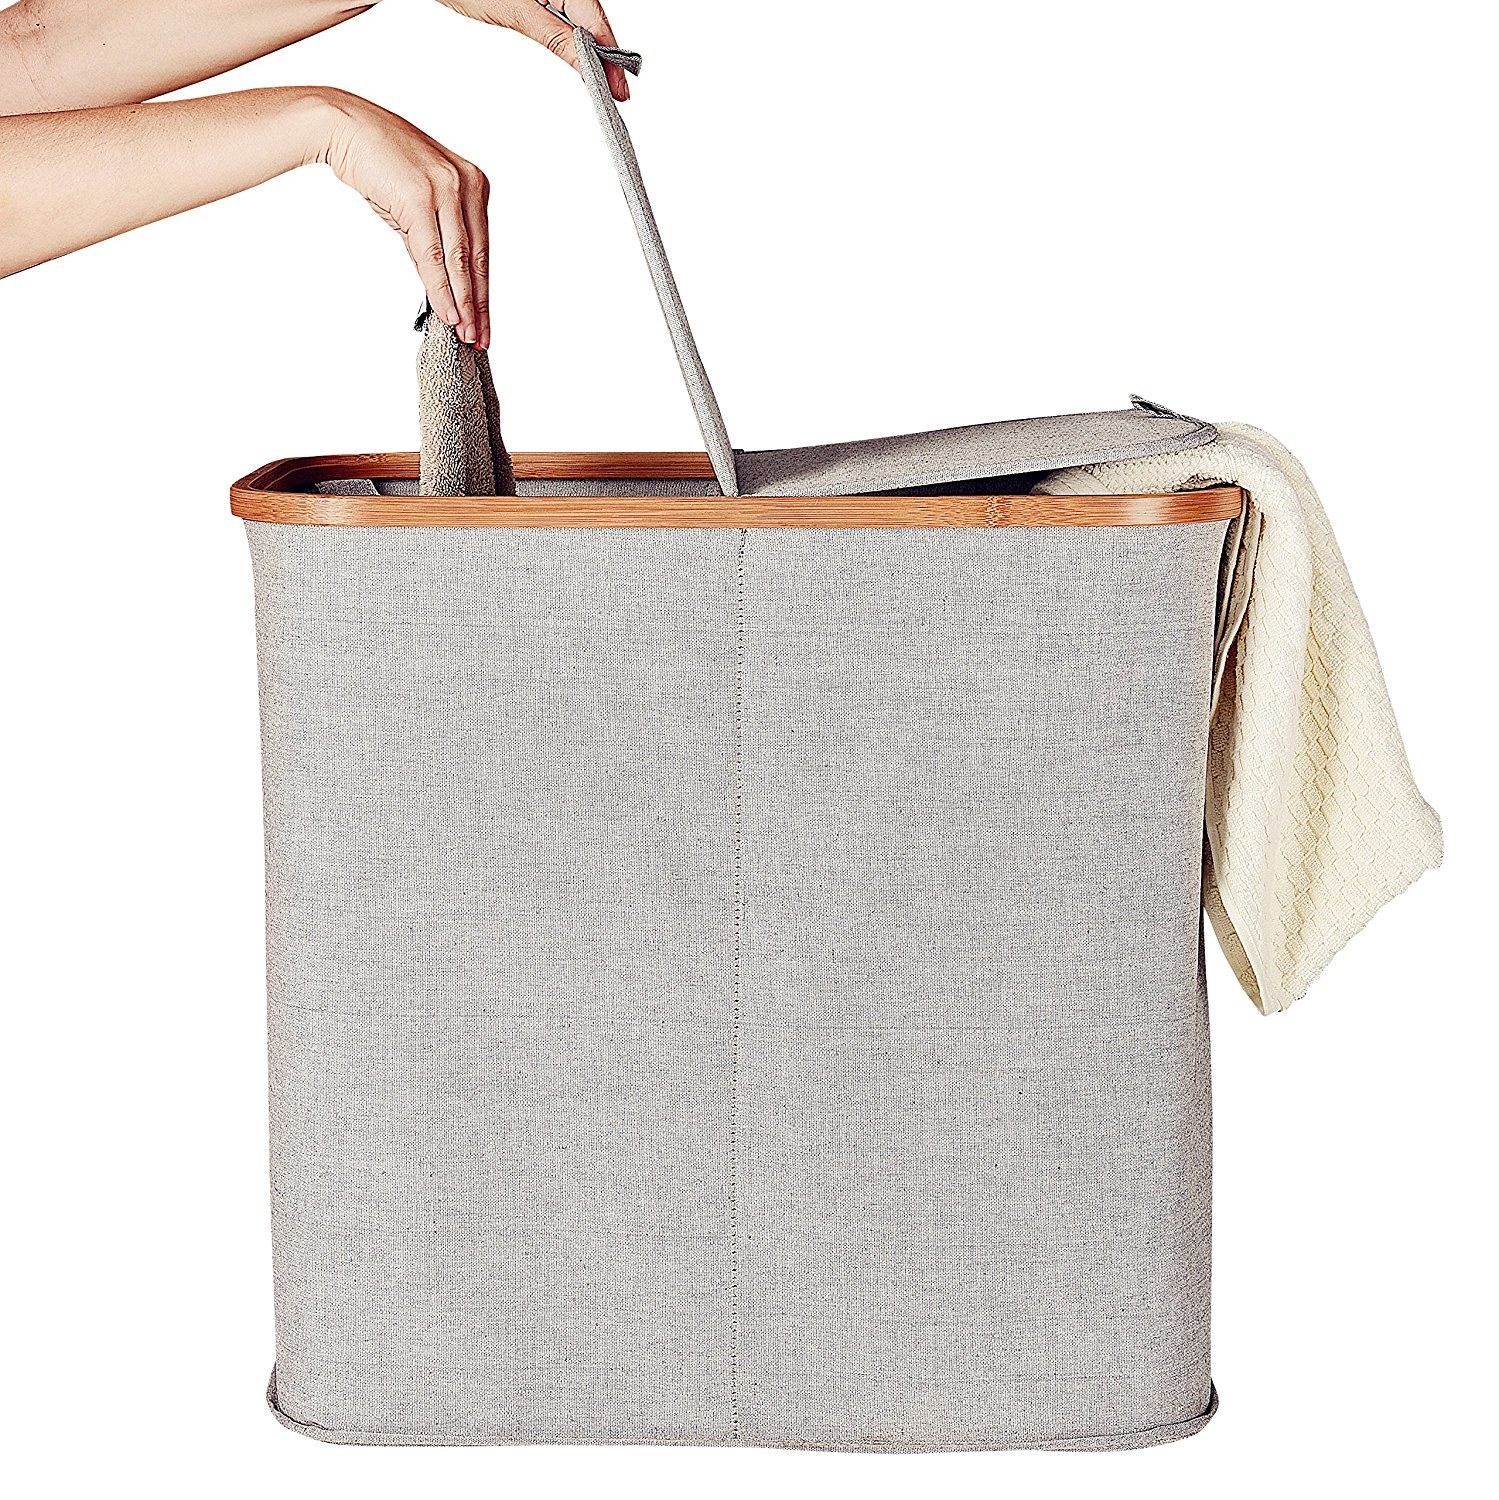 30 Of The Best Hampers And Laundry Bags You Can Get On Amazon